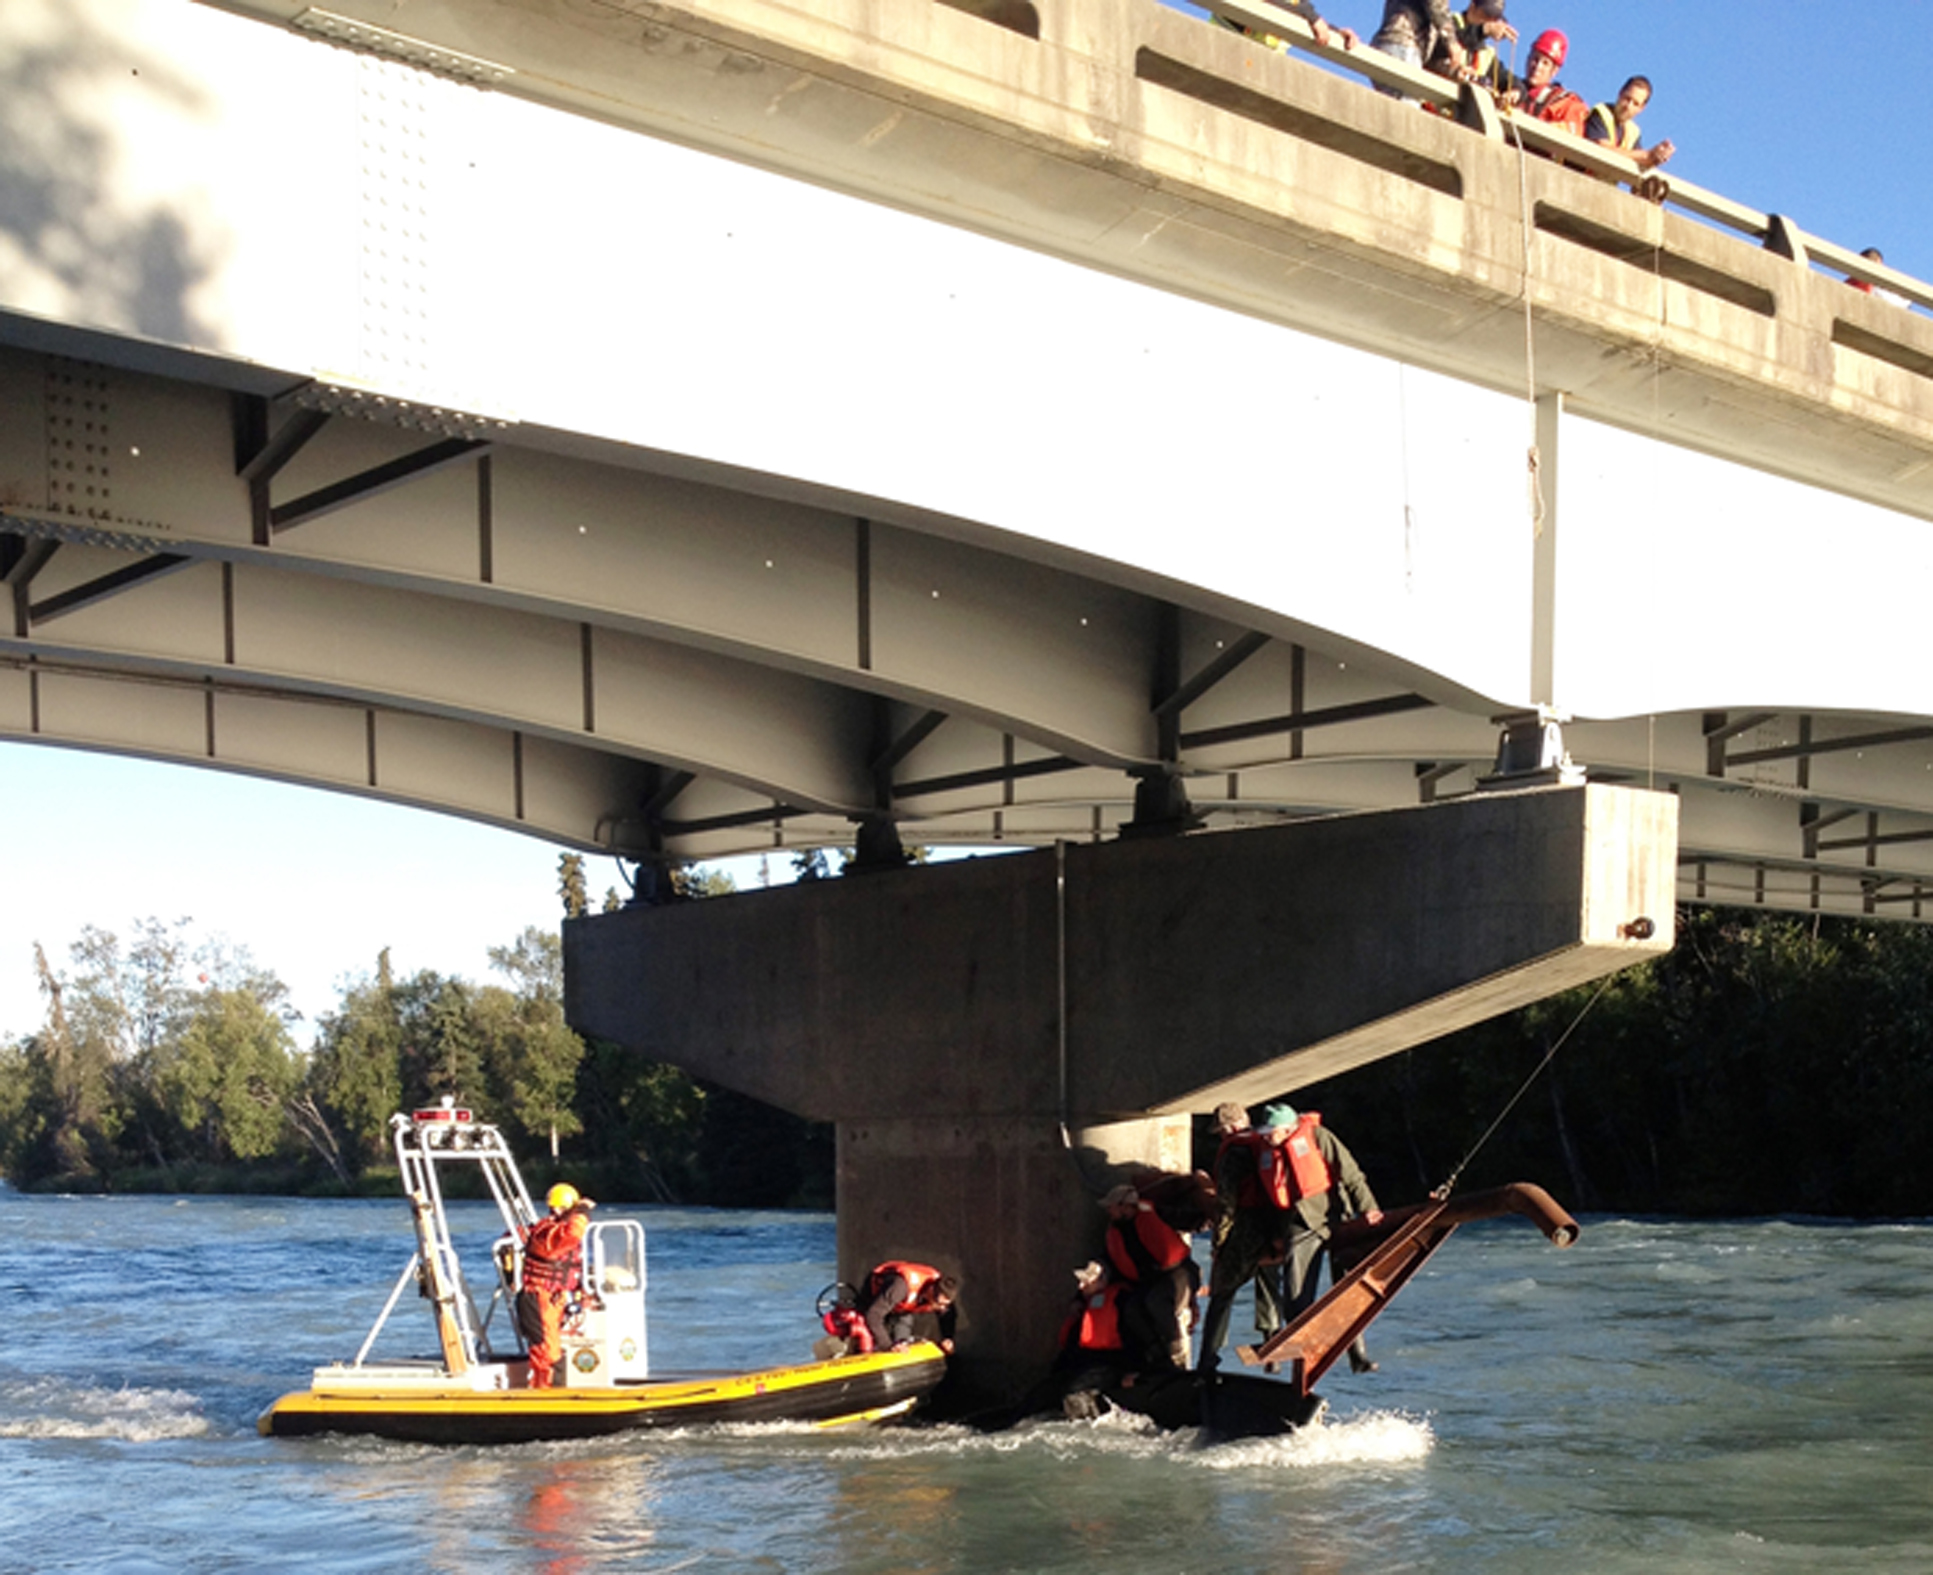 Responders rescue four men from the Kasilof River after a current overturned their boat shortly after they launched into the river Monday morning under the Kasilof Bridge of the Sterling Highway.